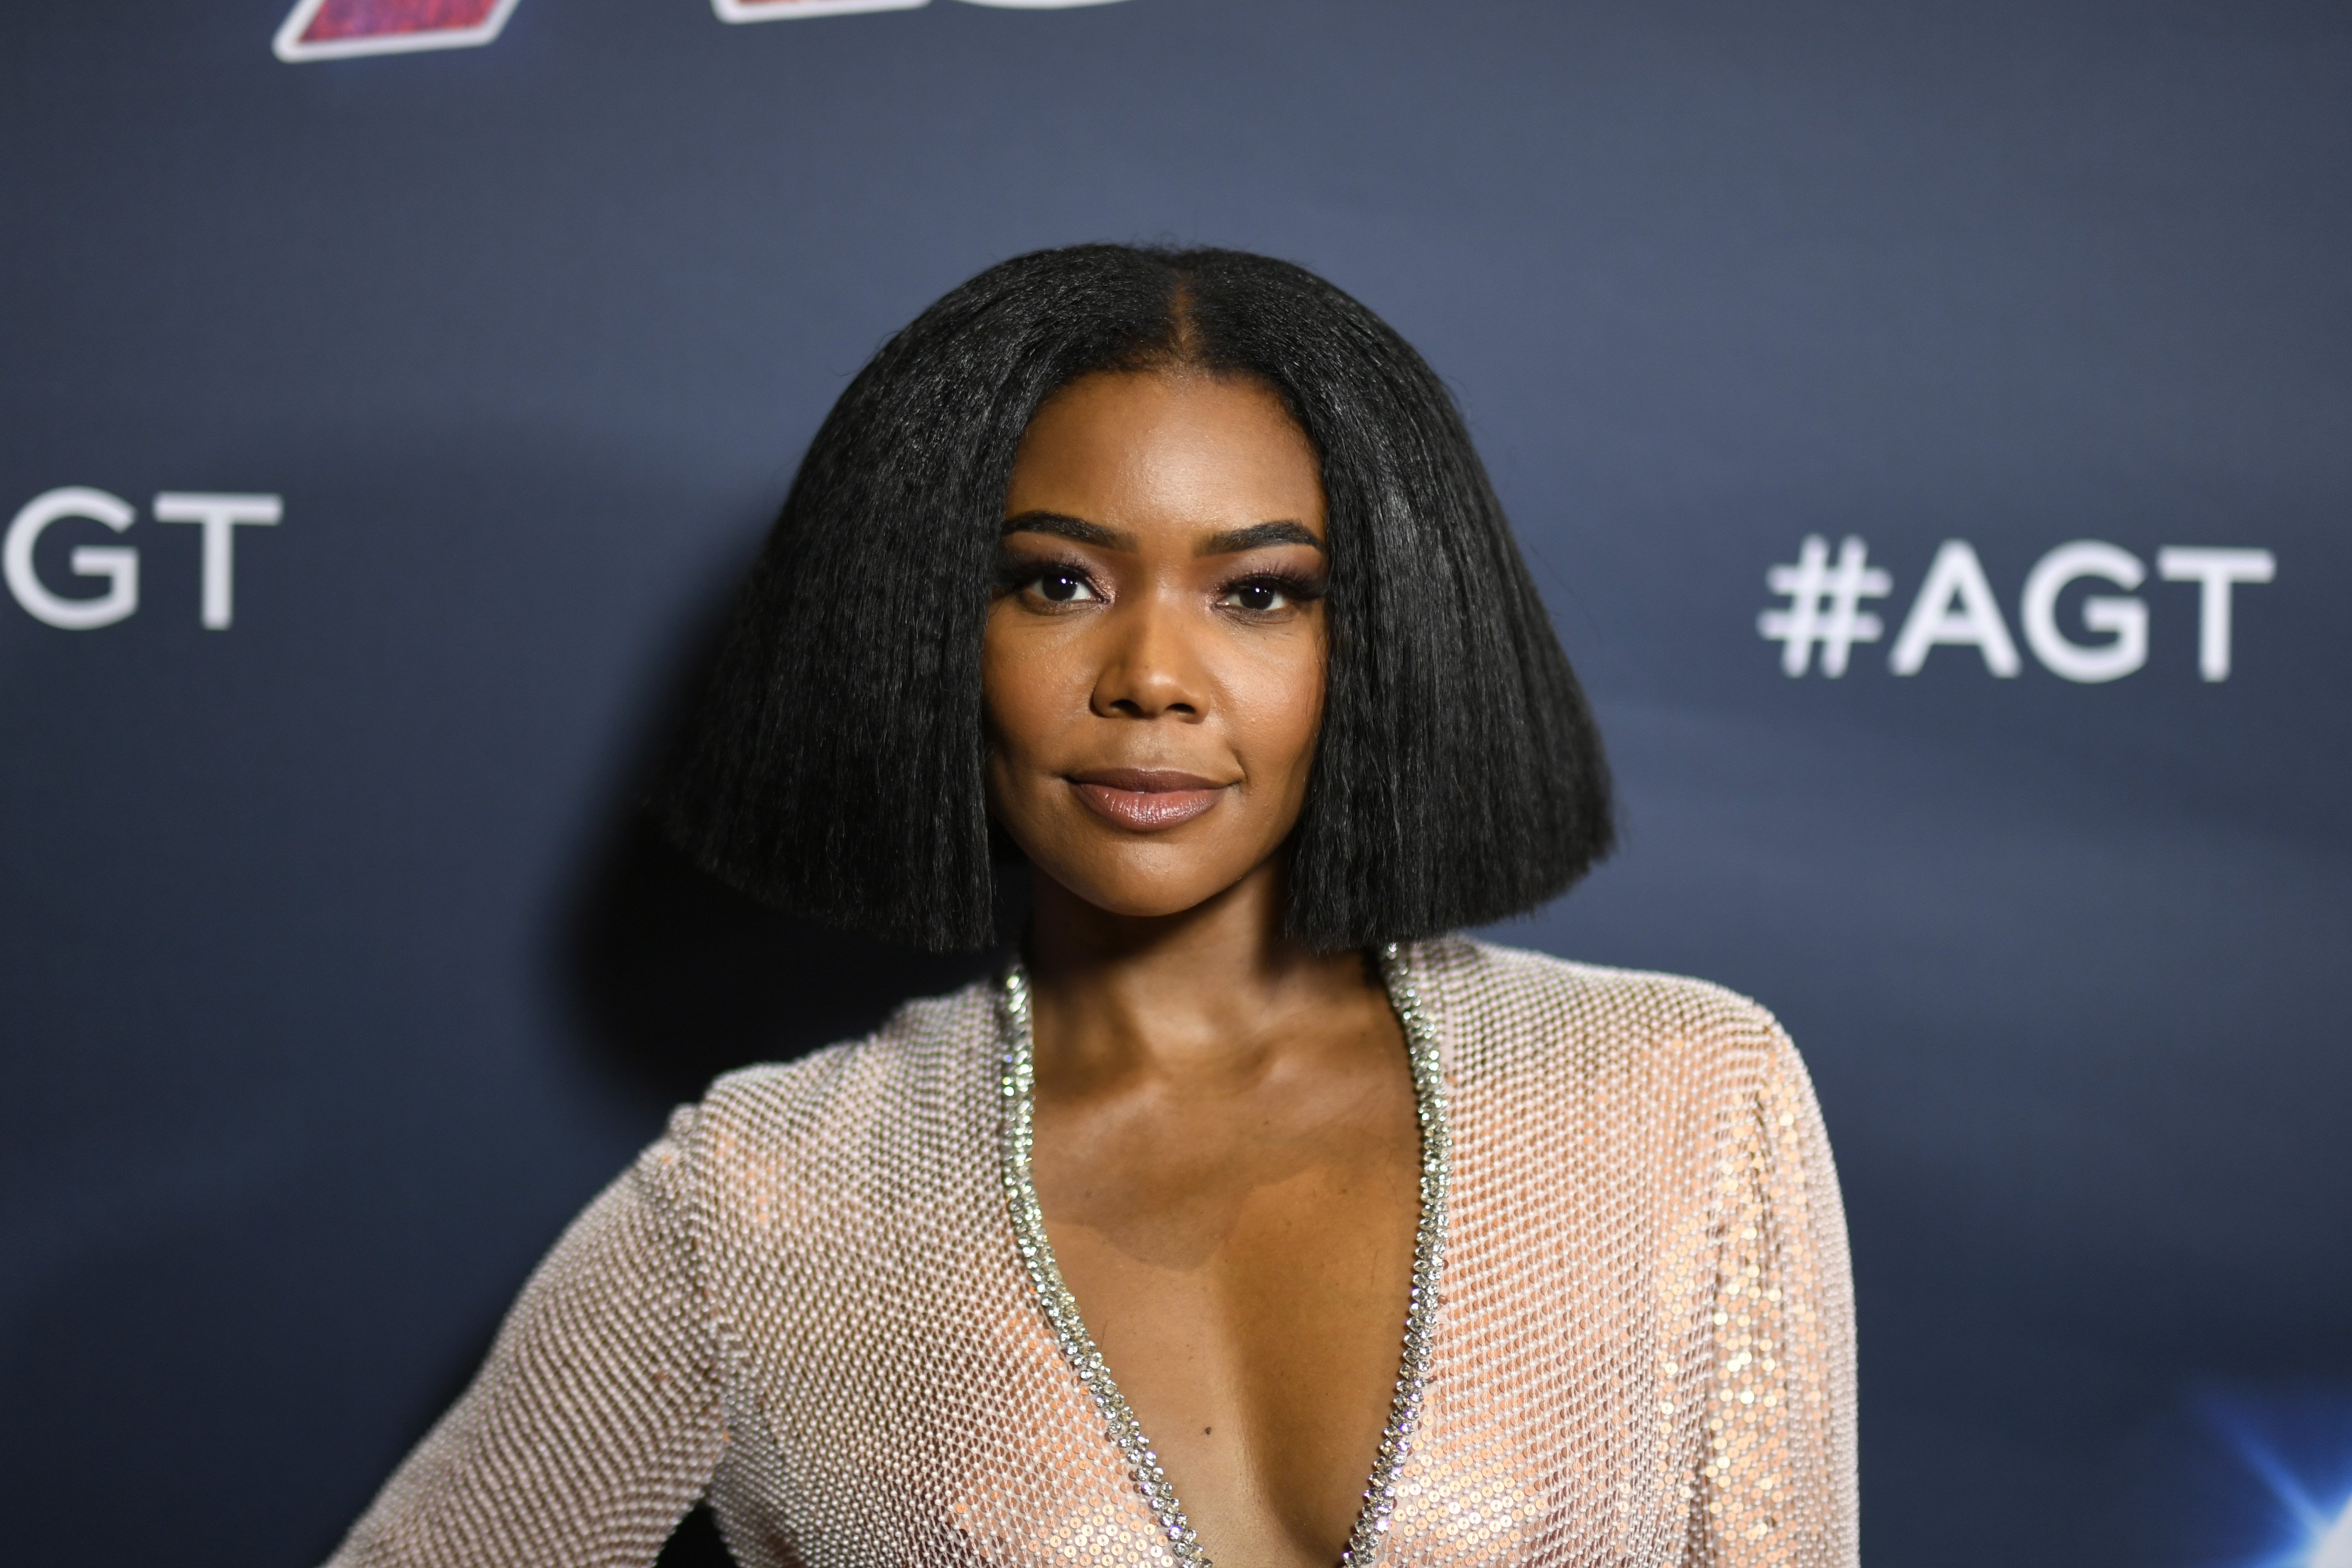 Gabrielle Union attends "America's Got Talent" Season 14 Finale Red Carpet at Dolby Theatre  | getty images : photos